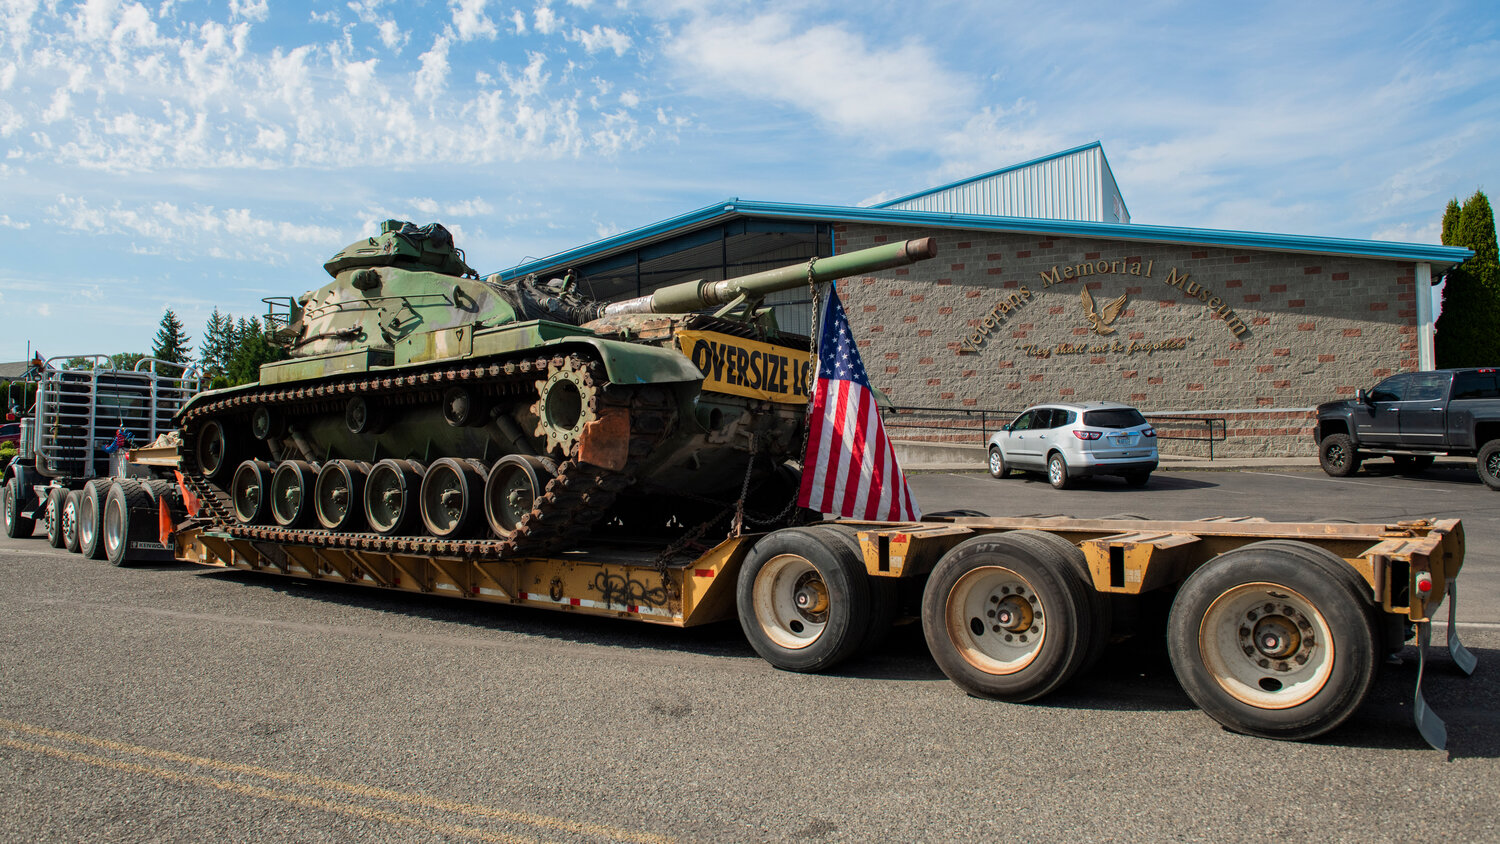 A M60 tank arrives in the parking lot of the Veterans Memorial Museum in Chehalis on Saturday, May 20. The tank came from the Lynden Historical Museum and plans are in place to complete a cosmetic restoration in the near future, according to Museum Director Chip Duncan.